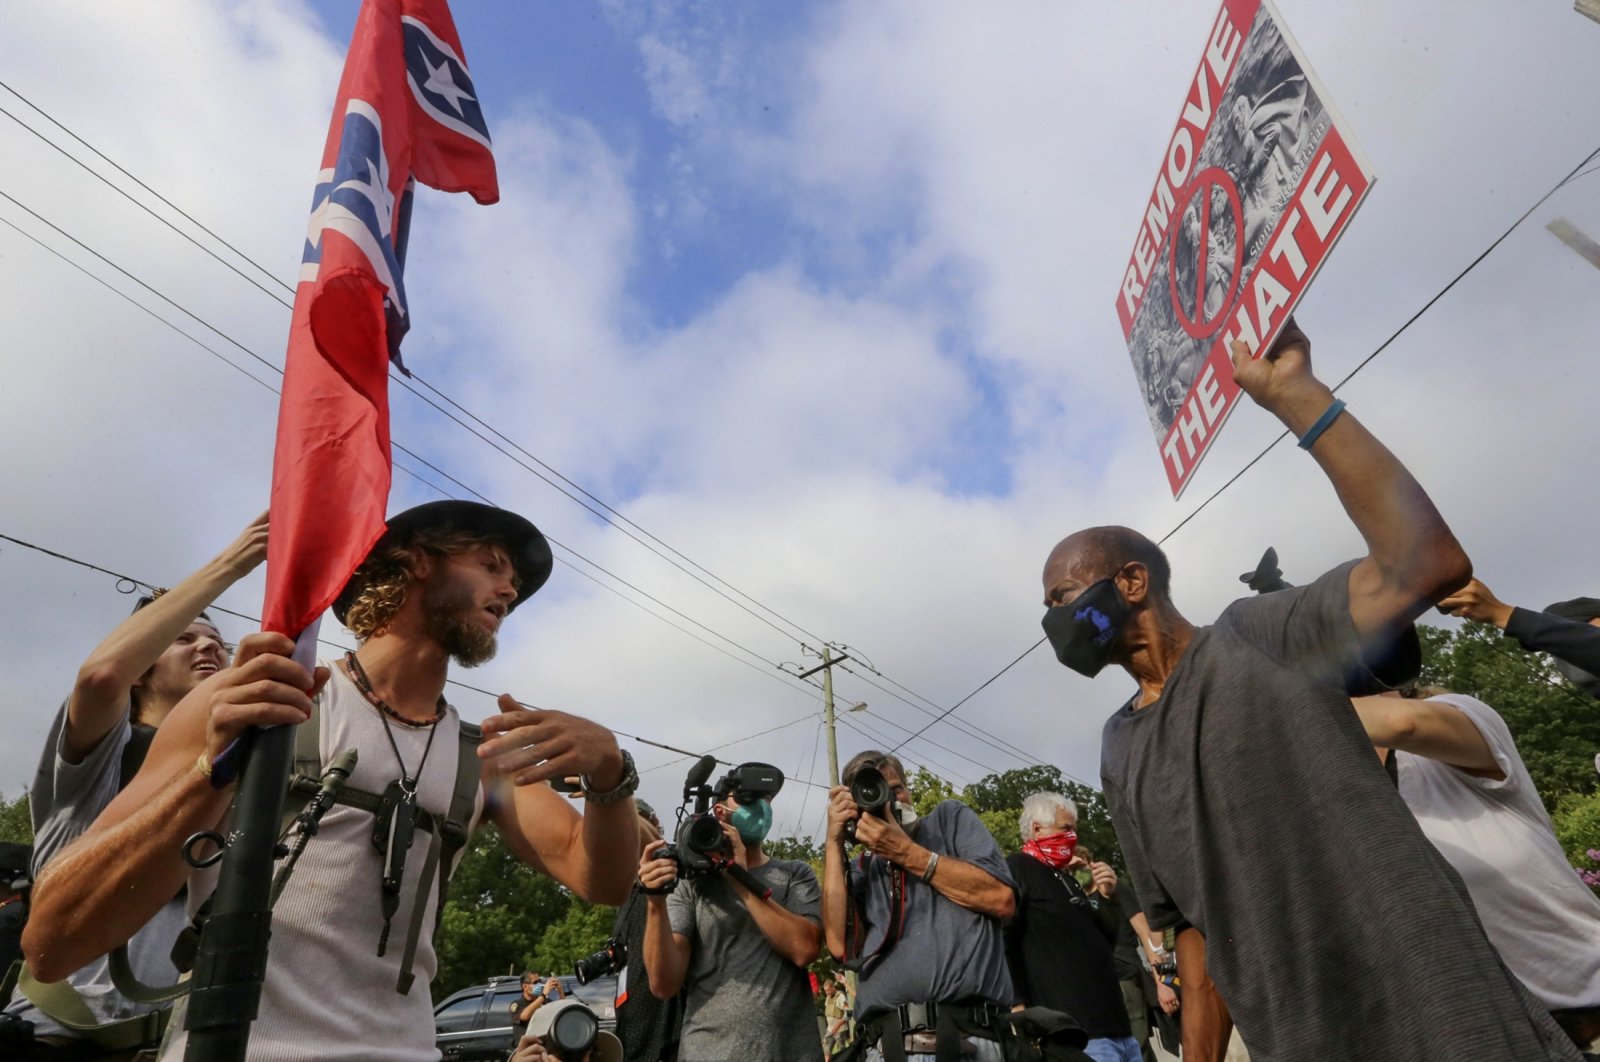 Protesters and counterprotesters face off in Stone Mountain Village, Georgia, U.S., Aug. 15, 2020. (AP)